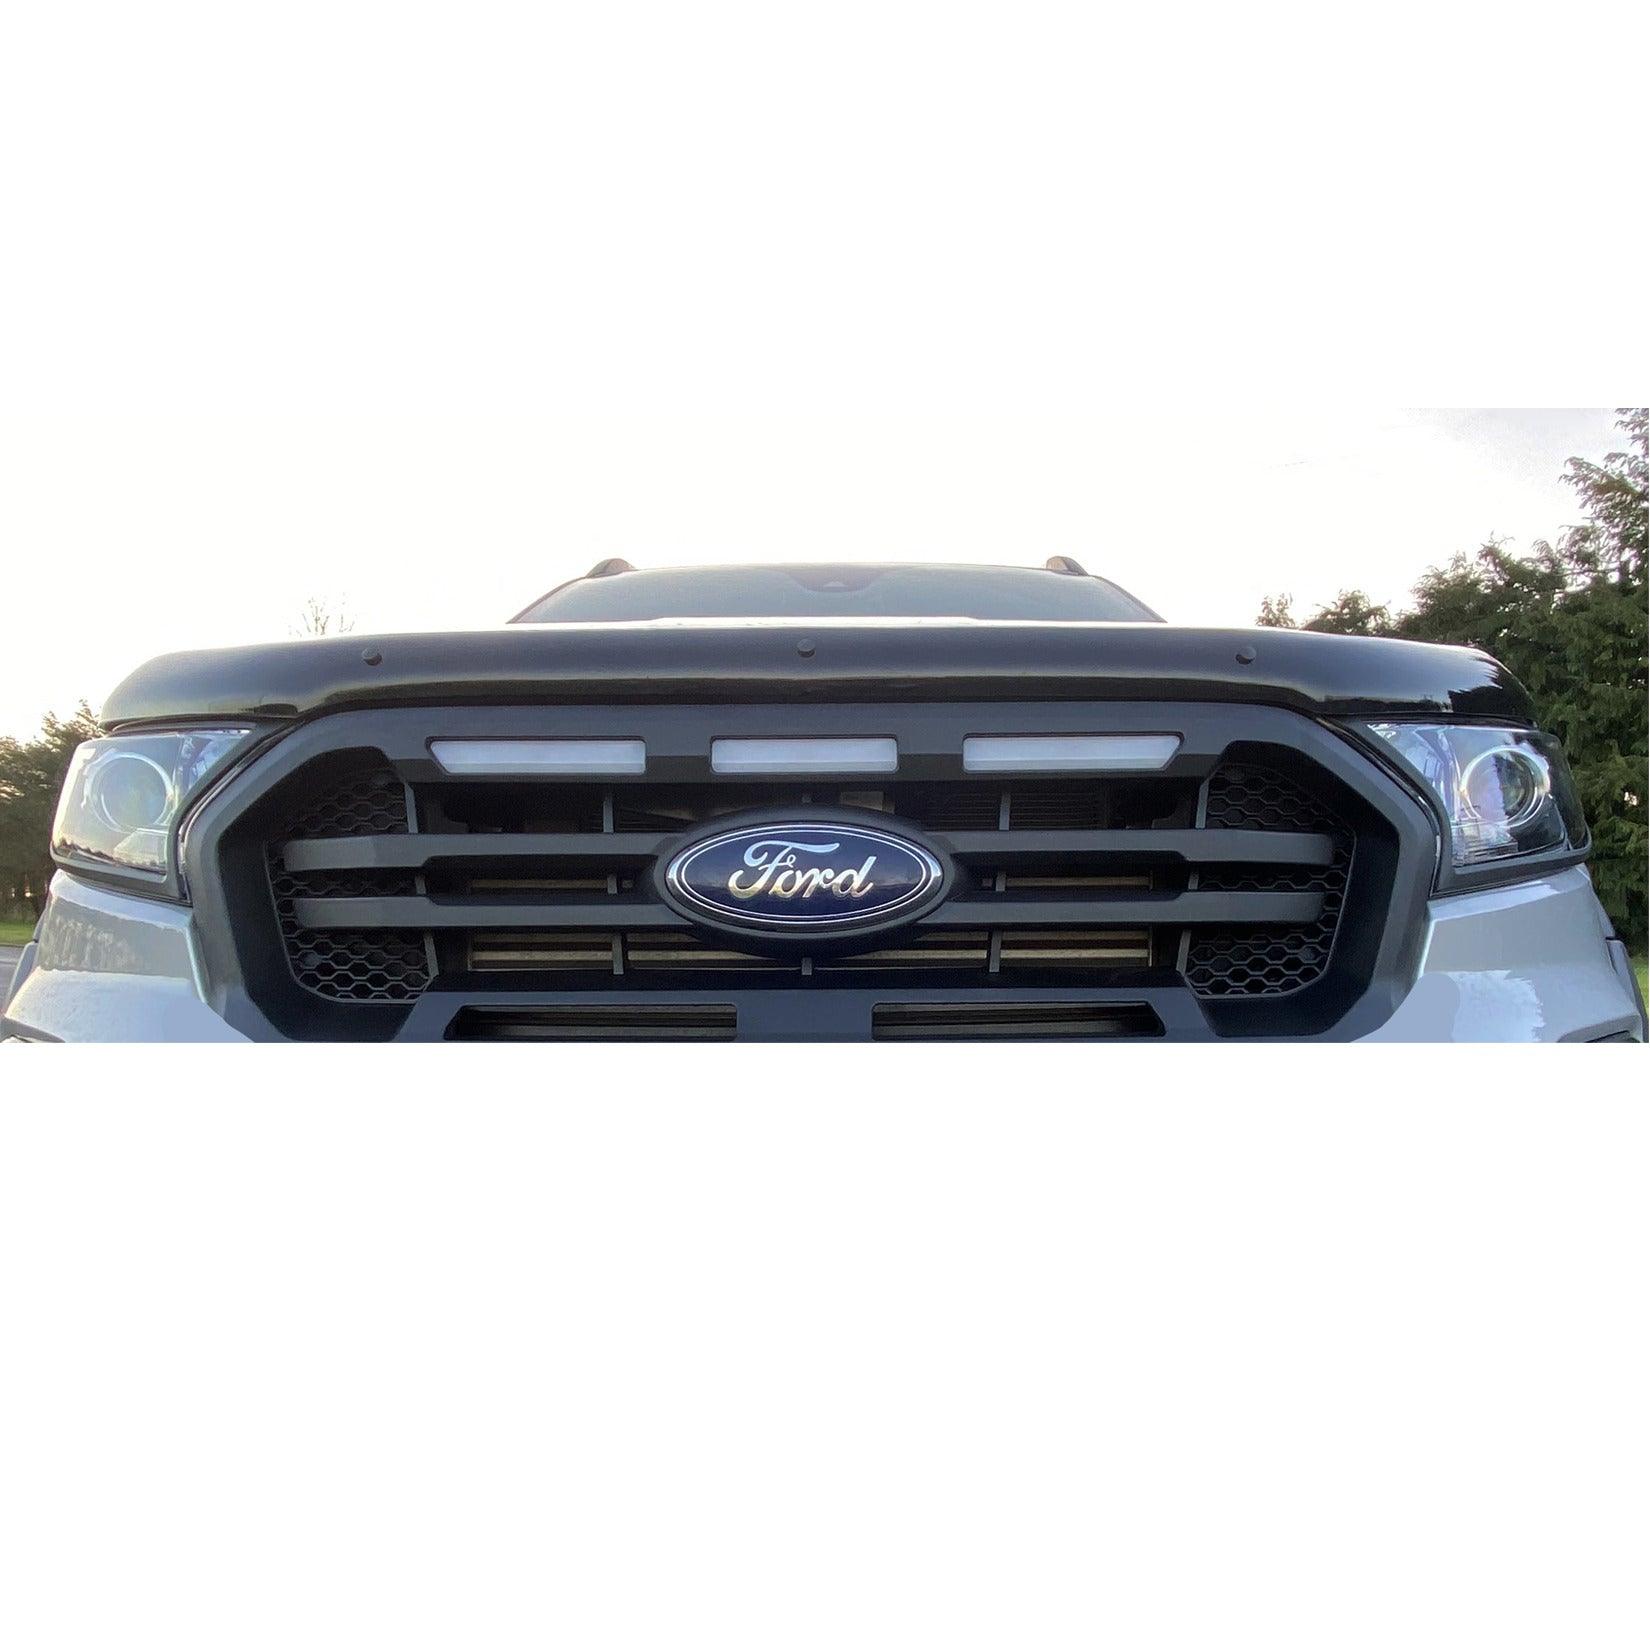 FORD RANGER T6 2019-2022 - REPLACEMENT GRILL WITH LEDS - BLACK - LOGO STYLE (NOT WILDTRAK) - Storm Xccessories2